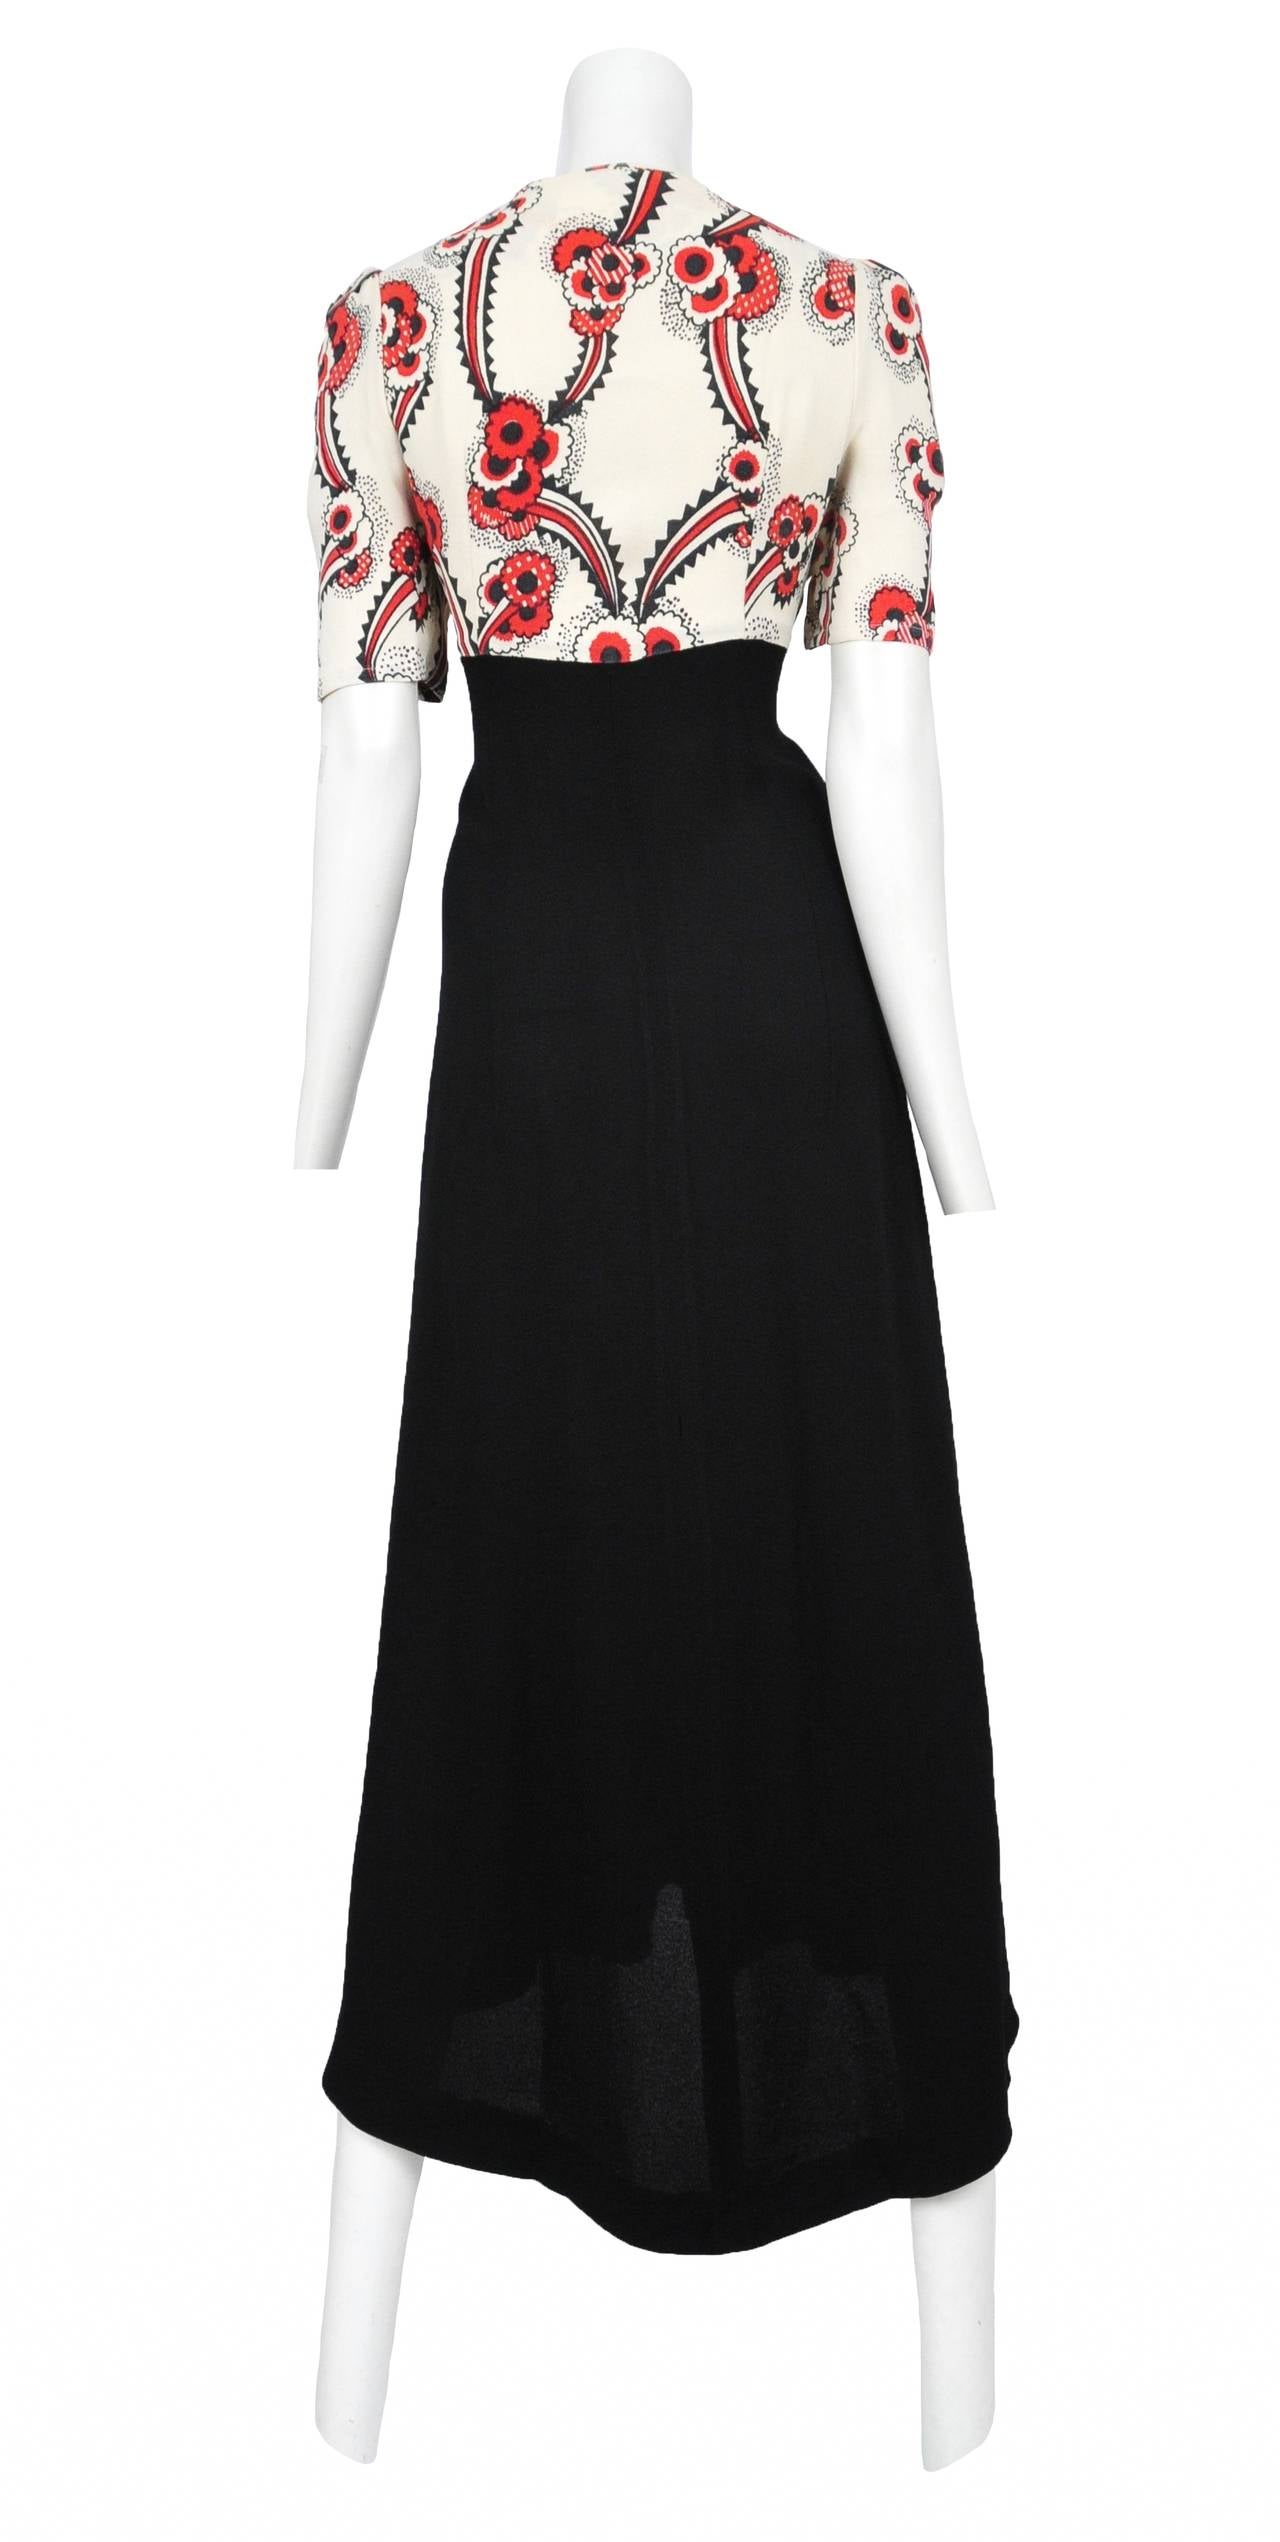 Vintage Ossie Clark moss crepe maxi dress featuring an iconic Celia Birtwell red, black and cream floral print on the short sleeve bodice. The bodice features a deep scoop neckline that is enclosed with a knot at the bust exposing a prominent